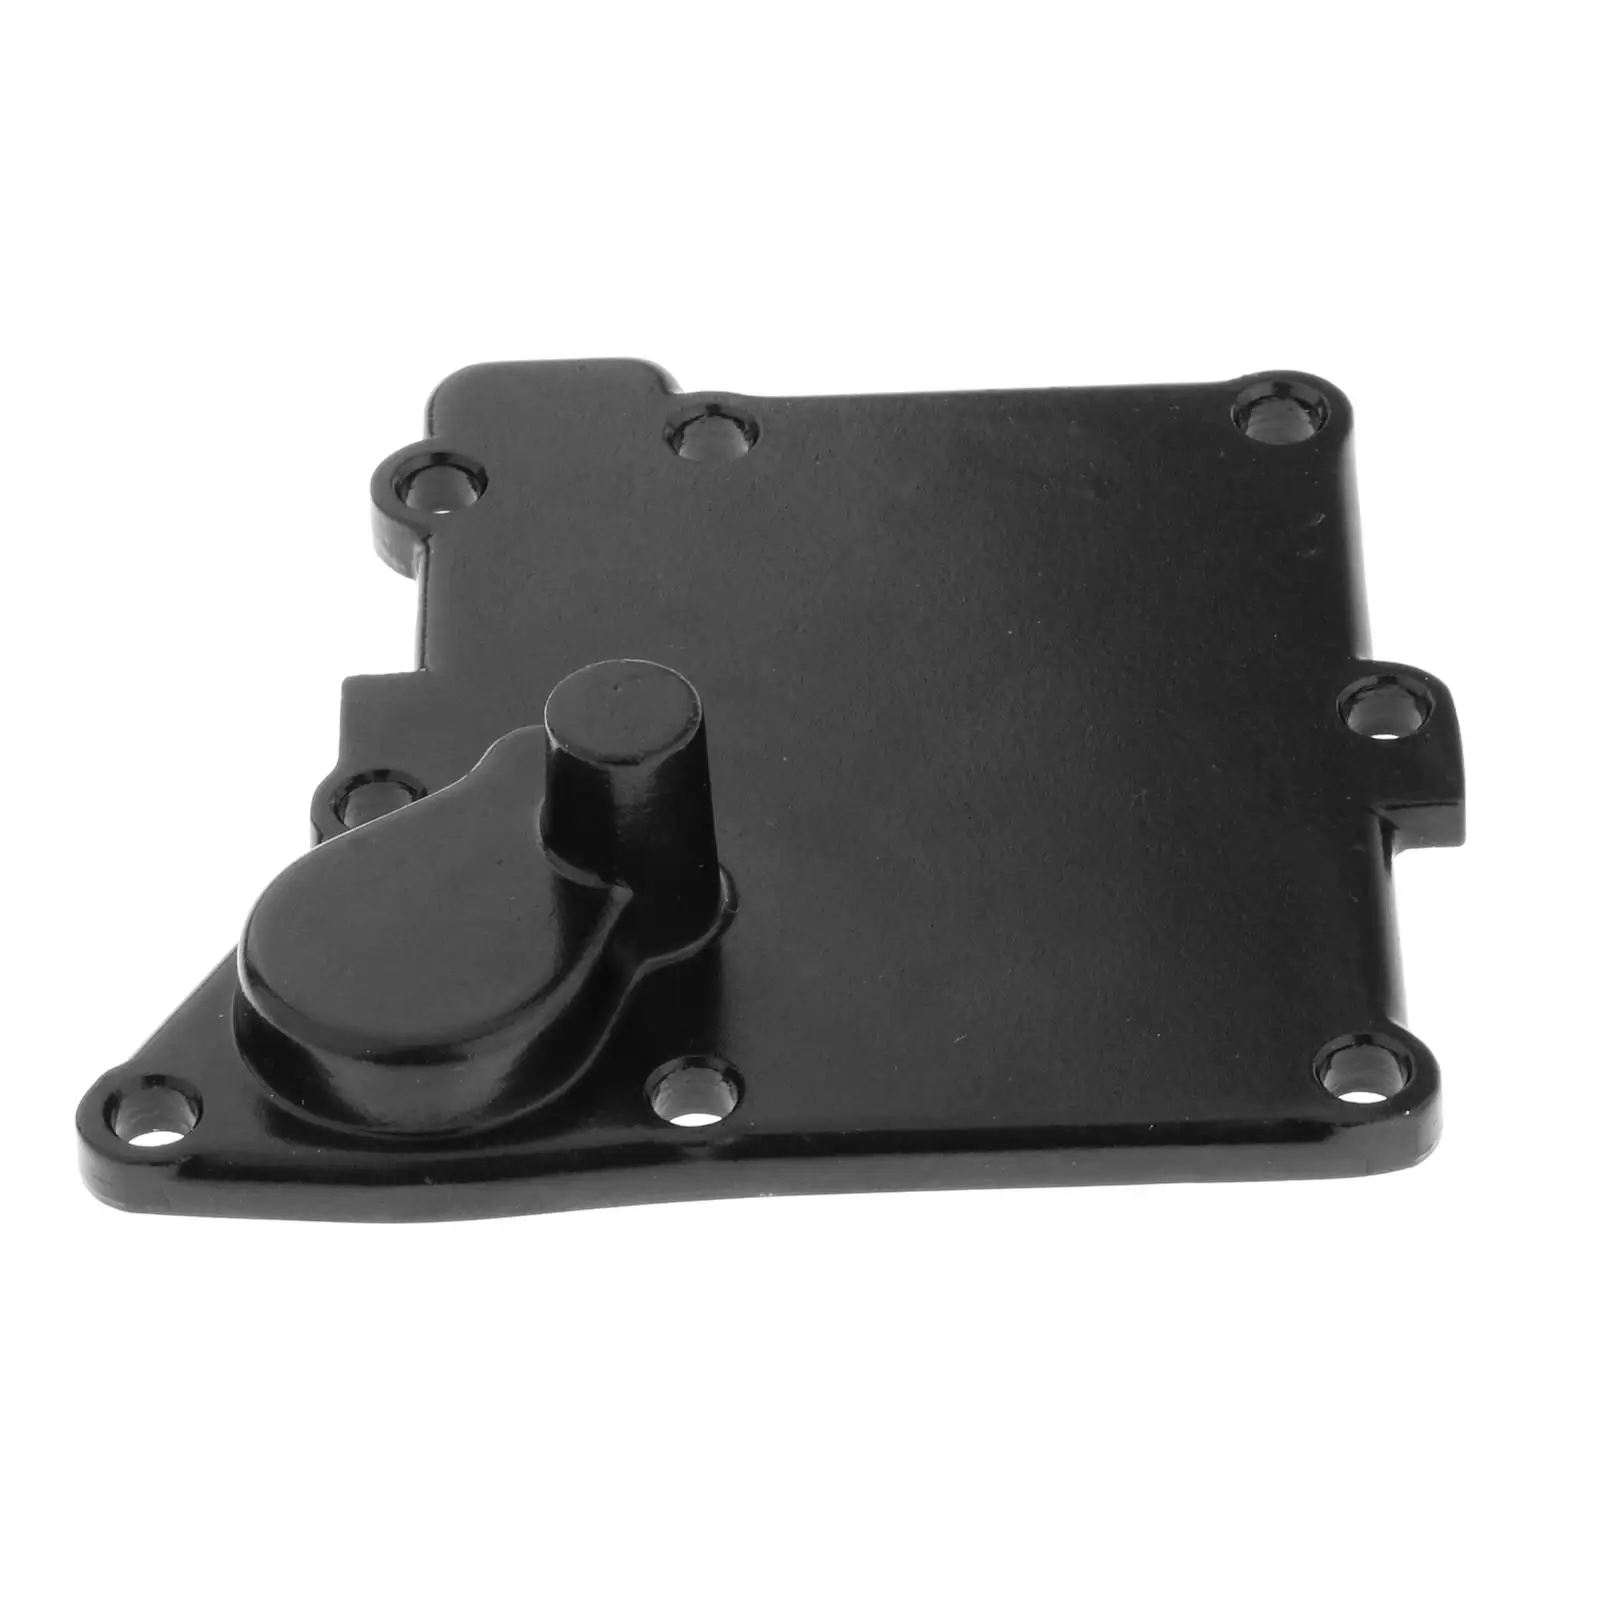 Exhaust Outter Cover Repair Parts Compatible with Yamaha 5HP 2T Outboard Parts Cylinder Cover 6E3-41113-01-9M